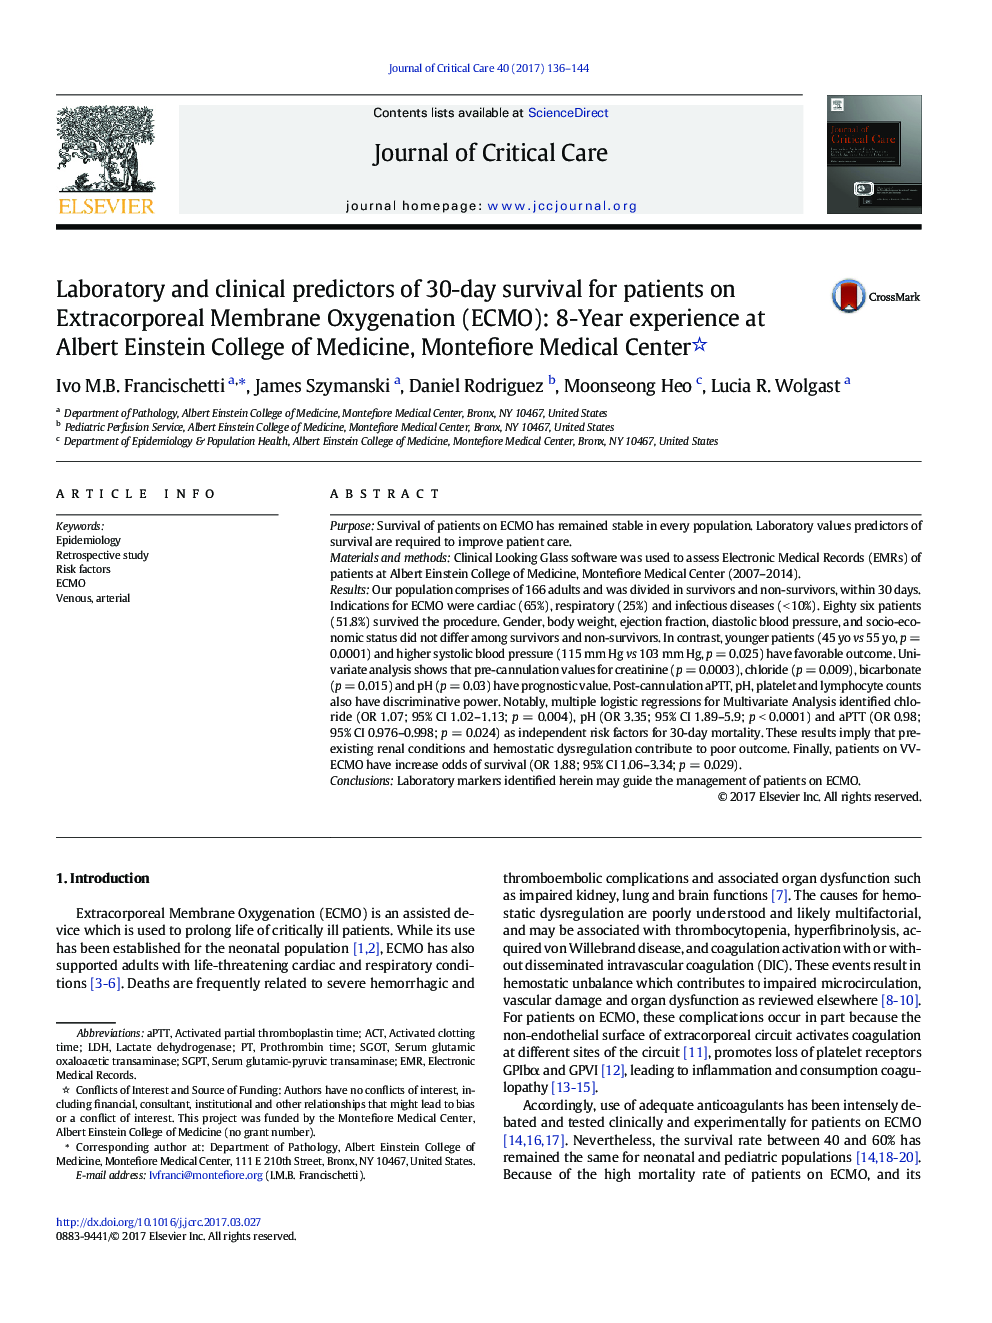 Laboratory and clinical predictors of 30-day survival for patients on Extracorporeal Membrane Oxygenation (ECMO): 8-Year experience at Albert Einstein College of Medicine, Montefiore Medical Center